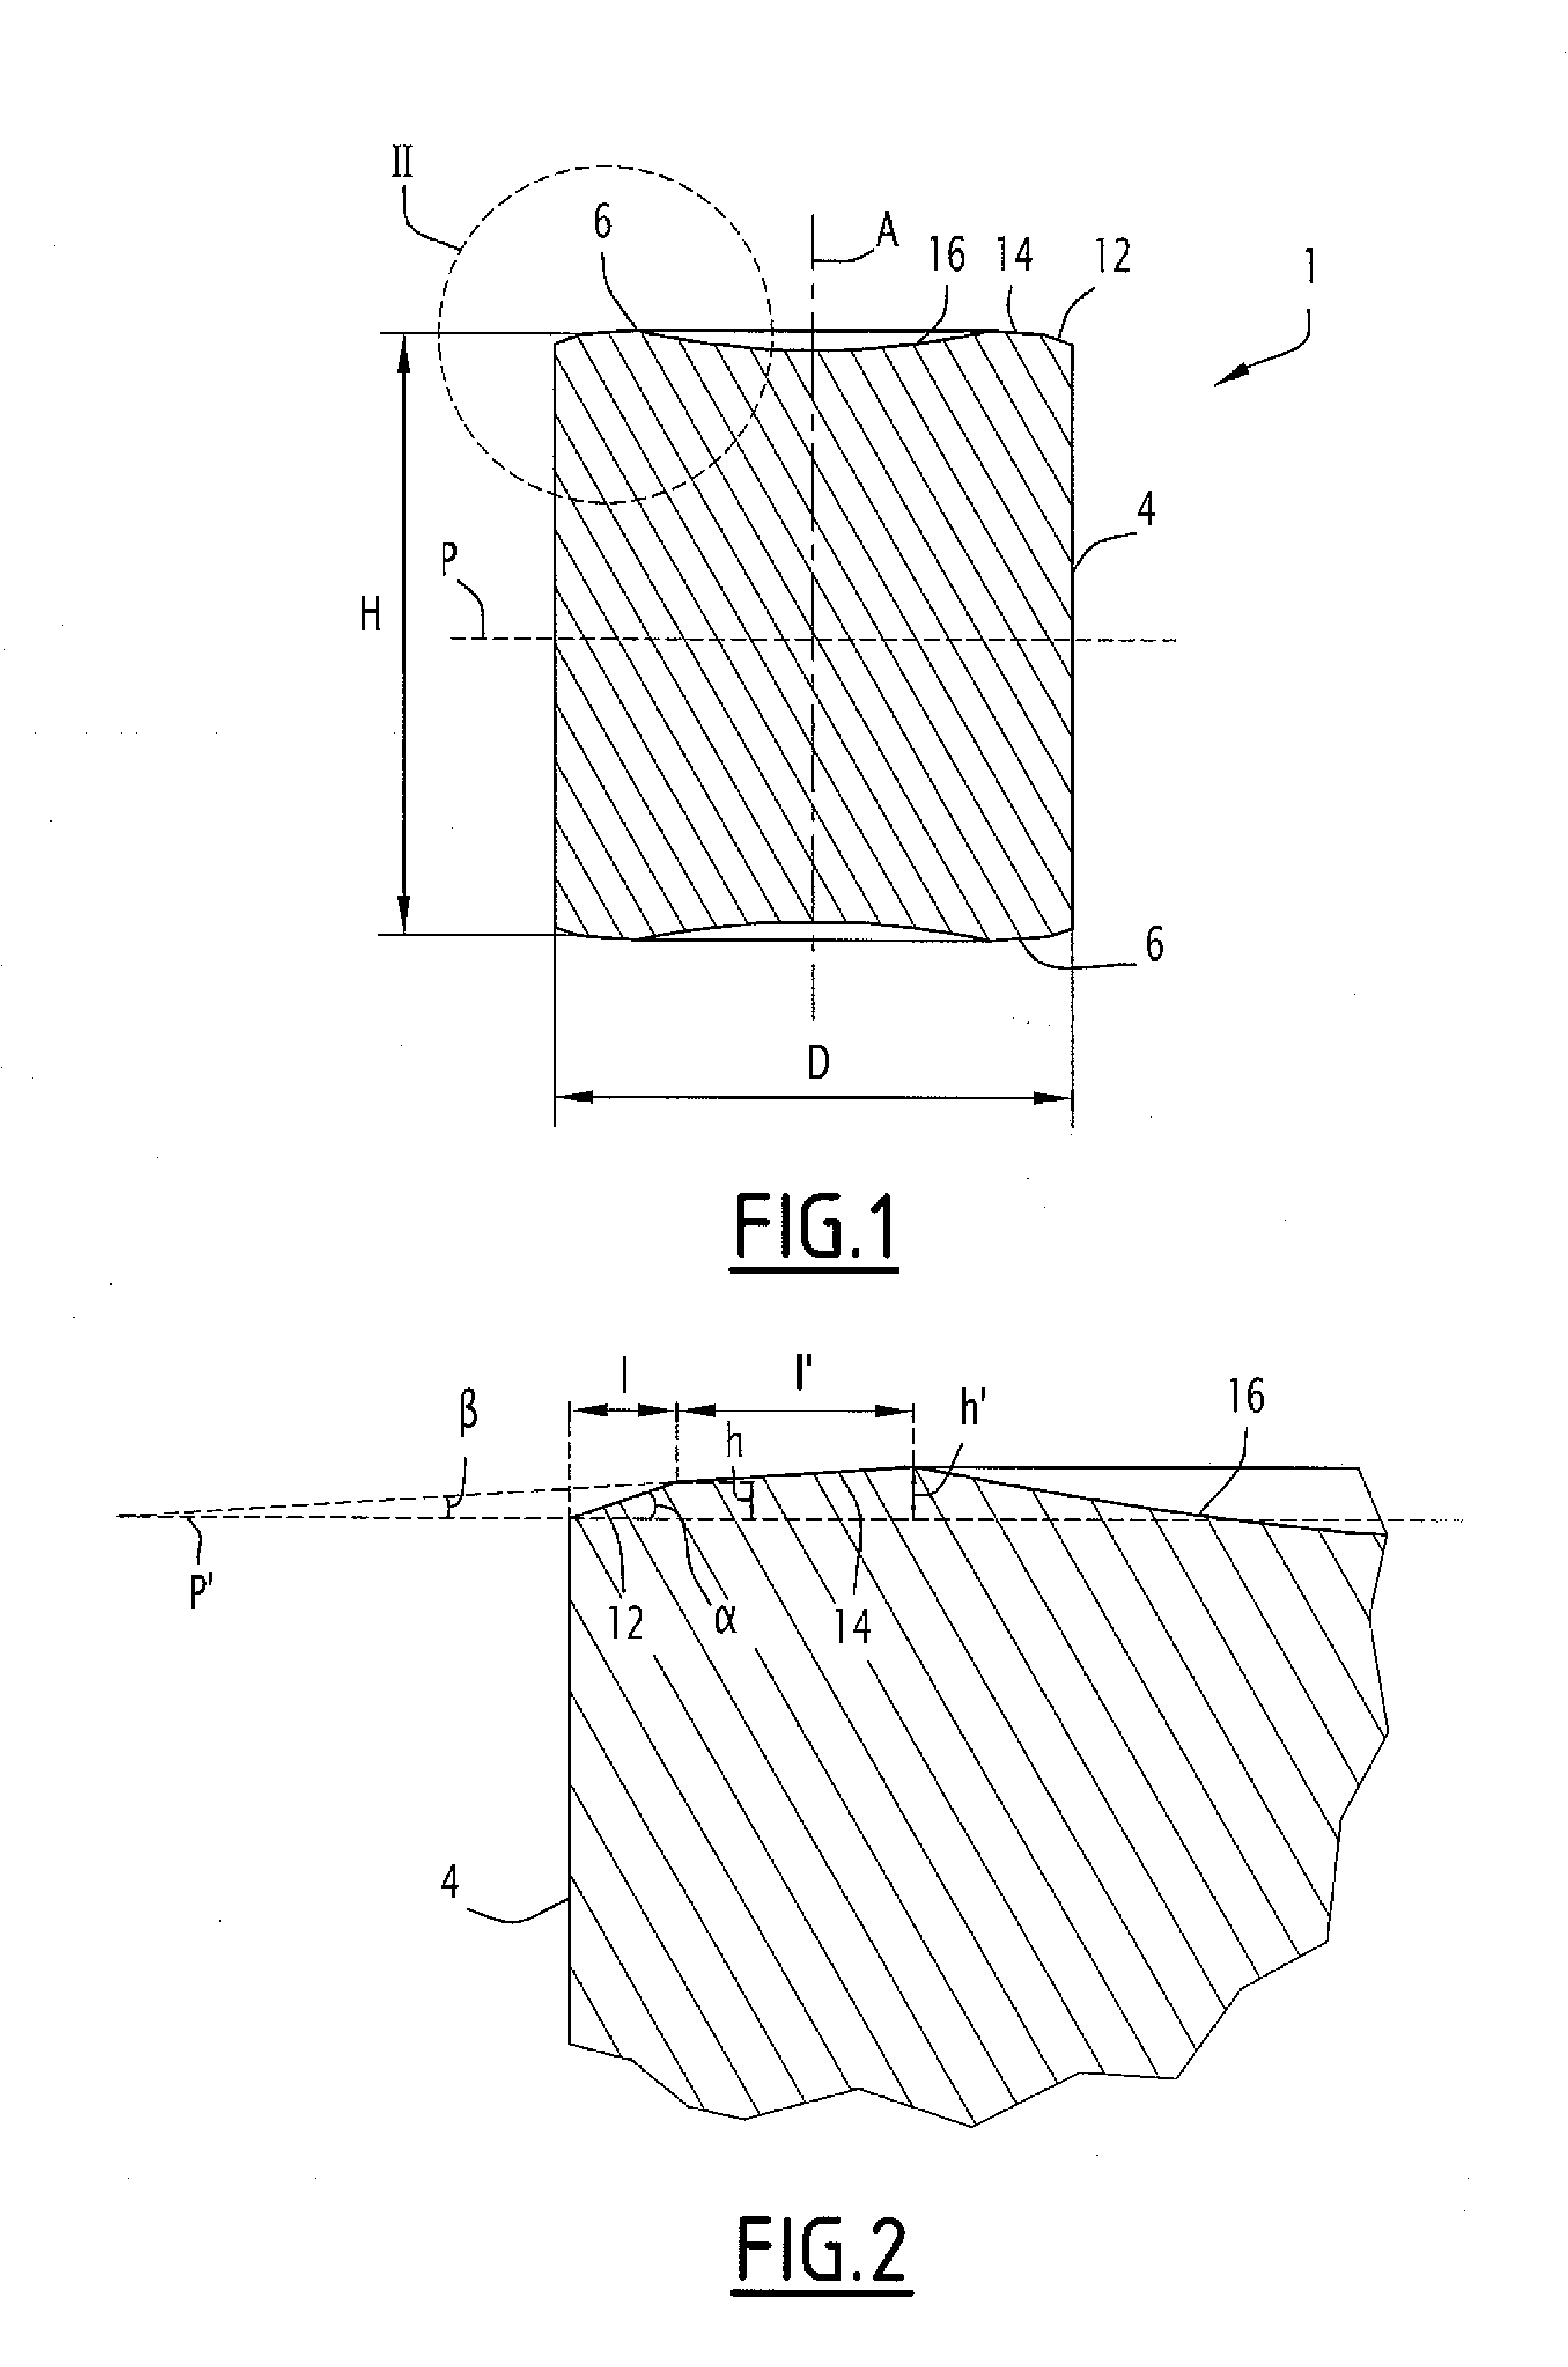 Nuclear reactor green and sintered fuel pellets, corresponding fuel rod and fuel assembly